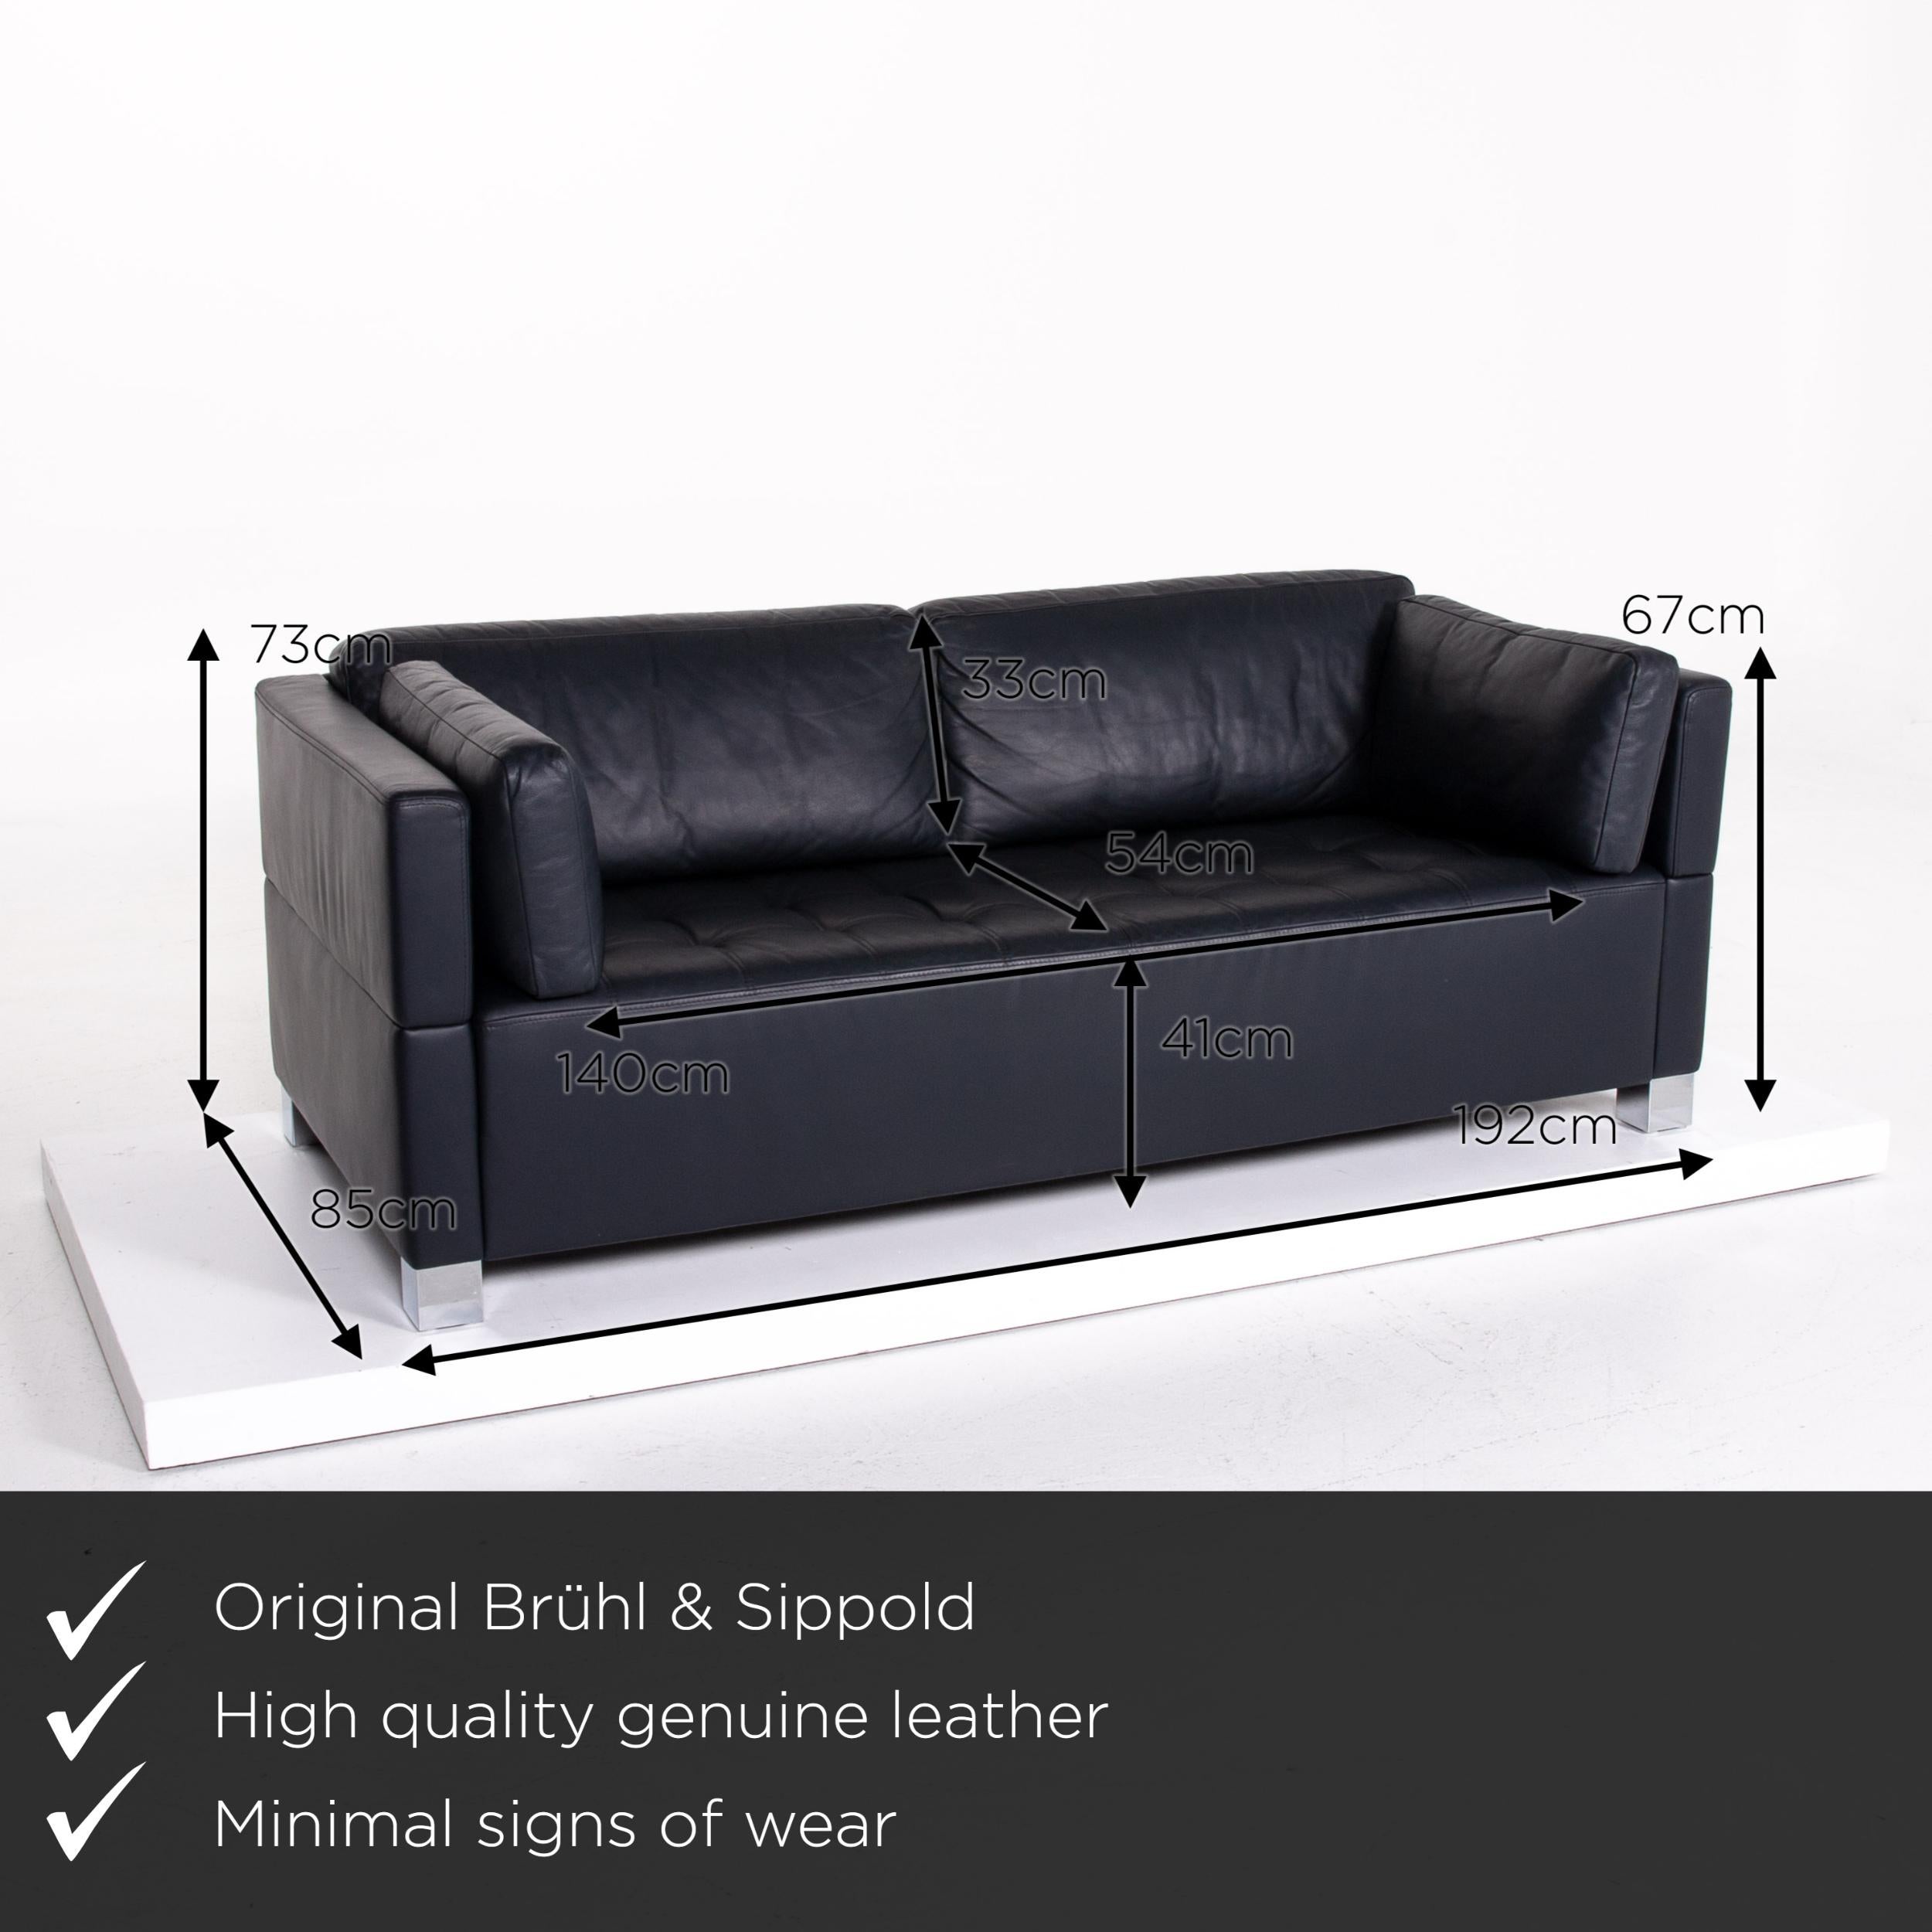 We present to you a Brühl & Sippold Carrée leather sofa dark blue blue three-seat couch.
   
 

 Product measurements in centimeters:
 

Depth 85
Width 192
Height 73
Seat height 41
Rest height 67
Seat depth 54
Seat width 140
Back